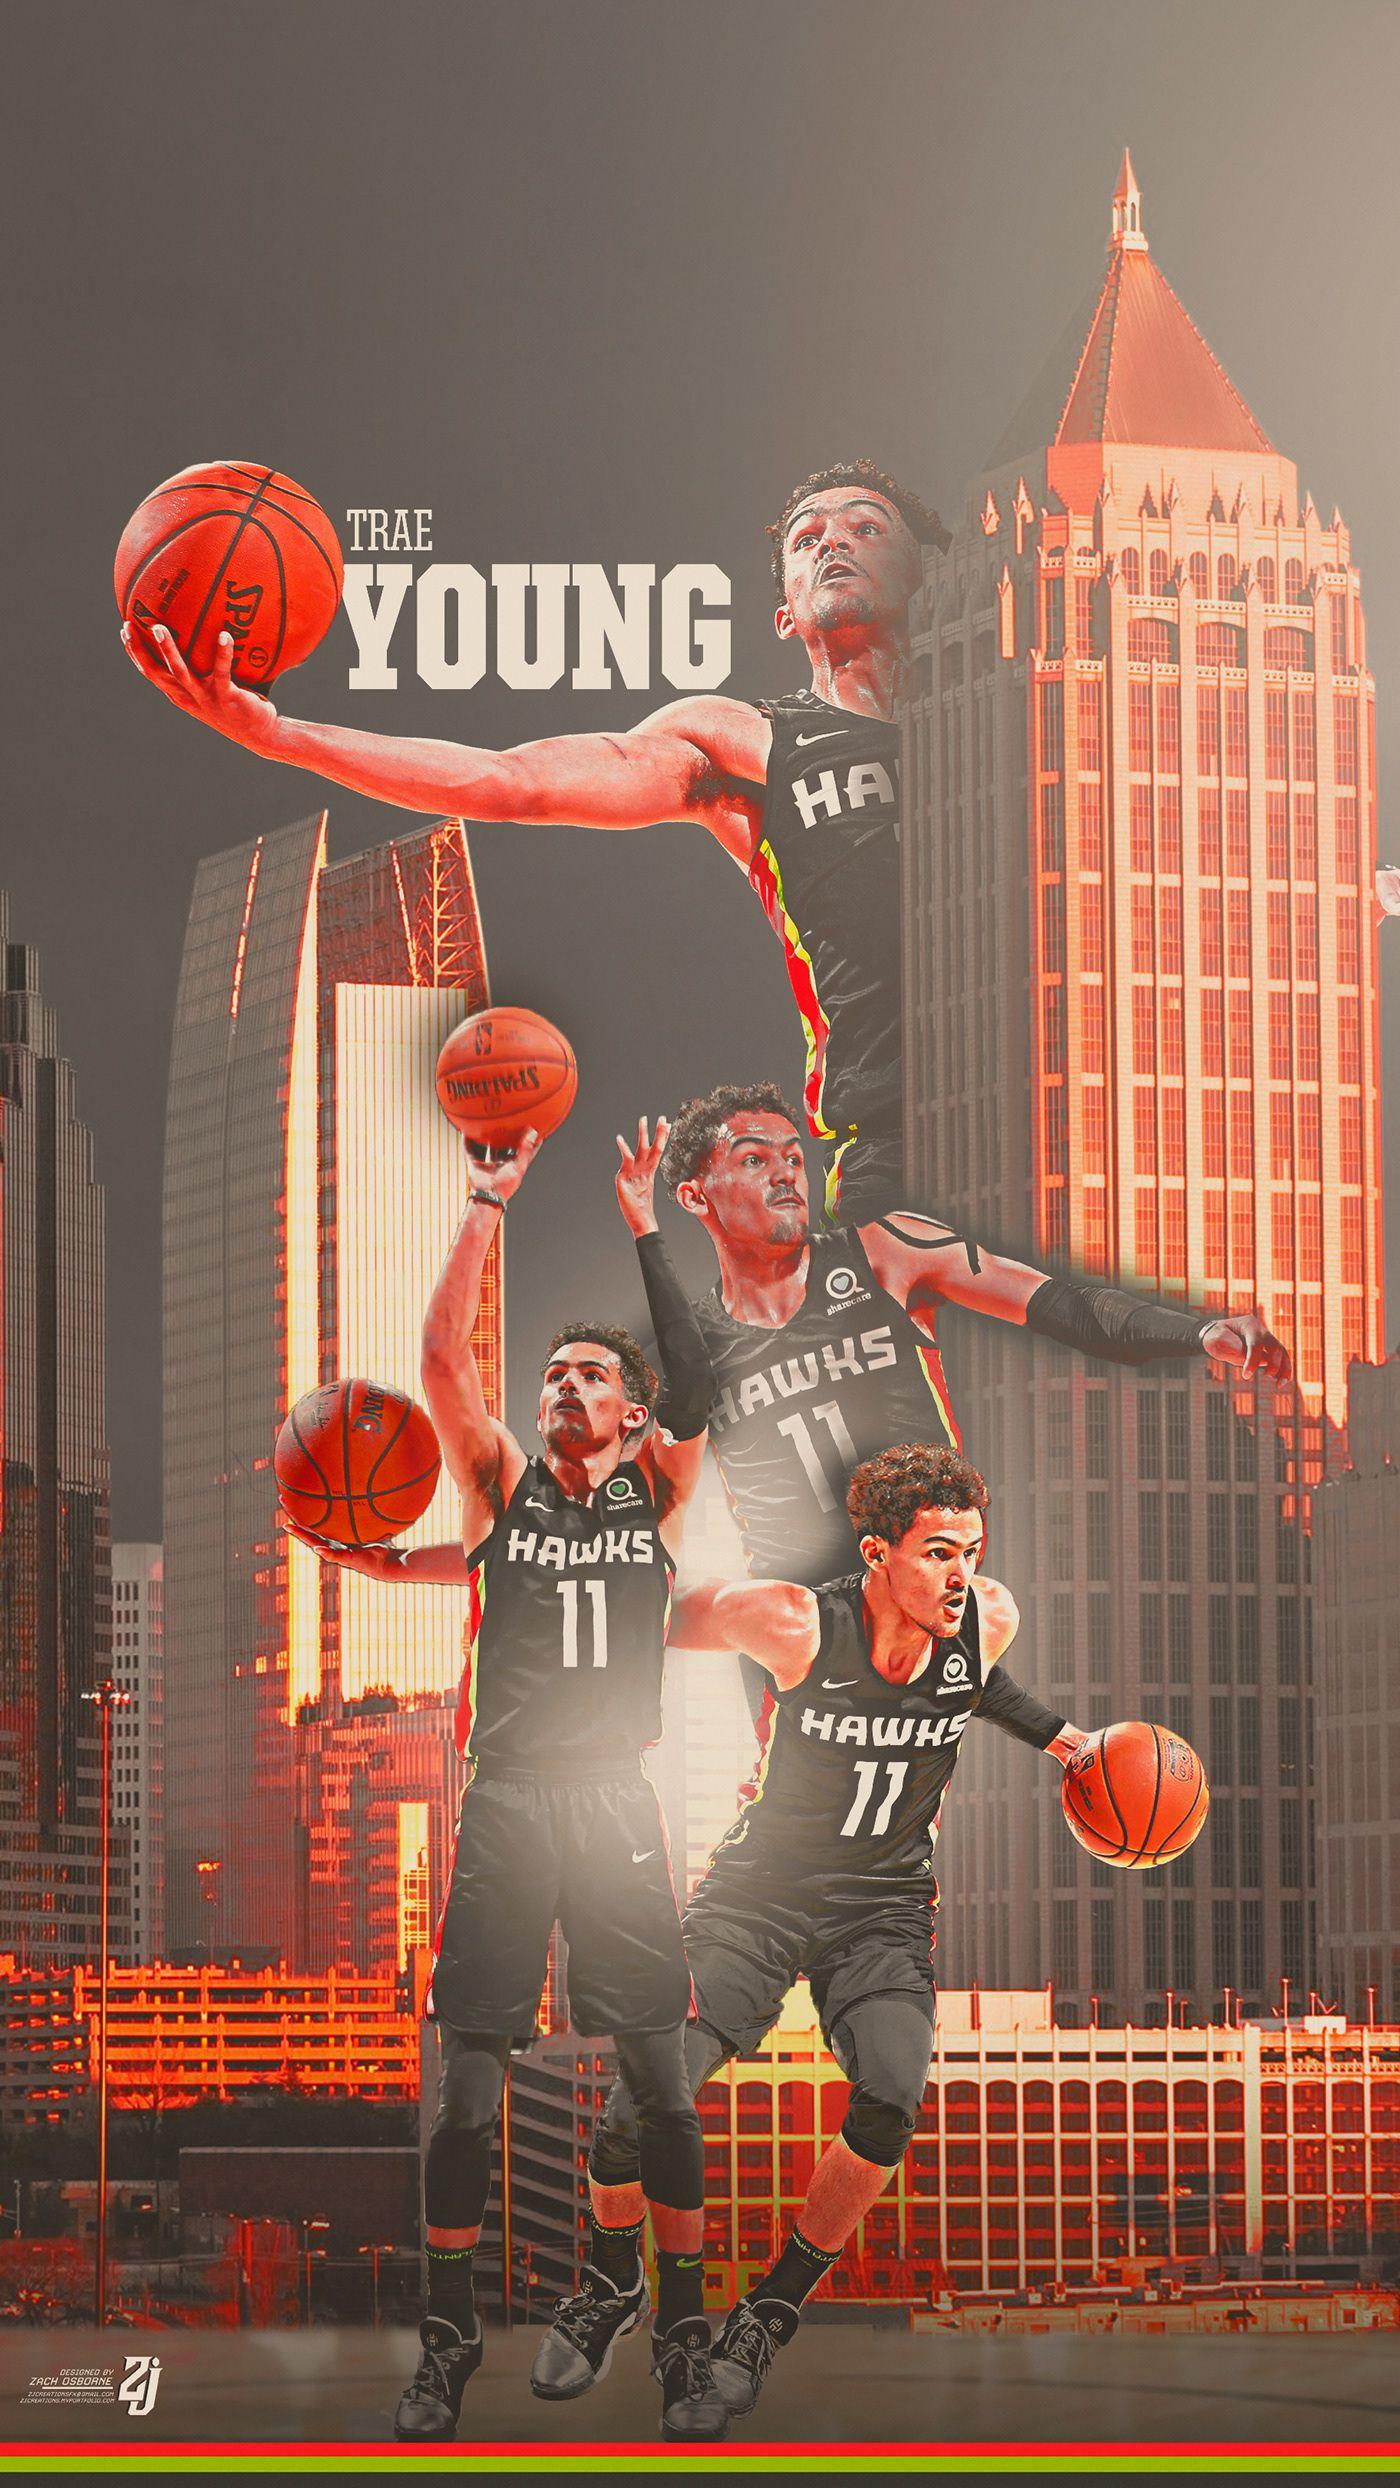 Trae Young on Behance